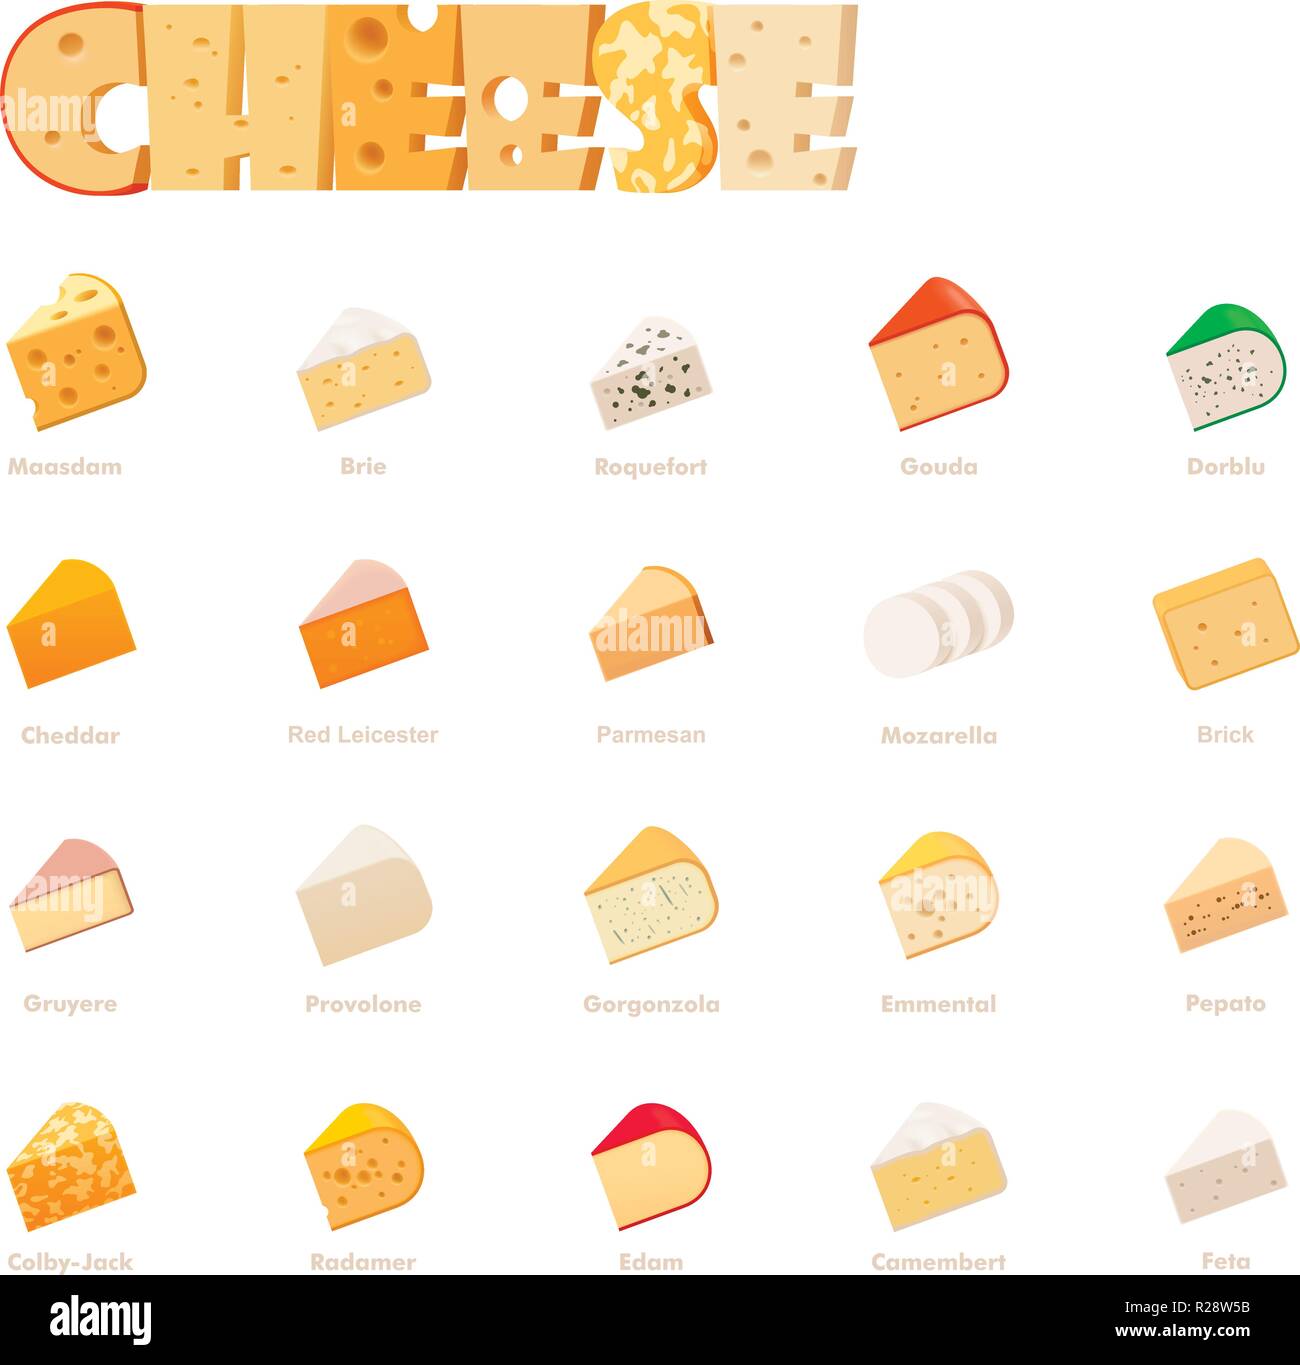 Cheese Chart Types